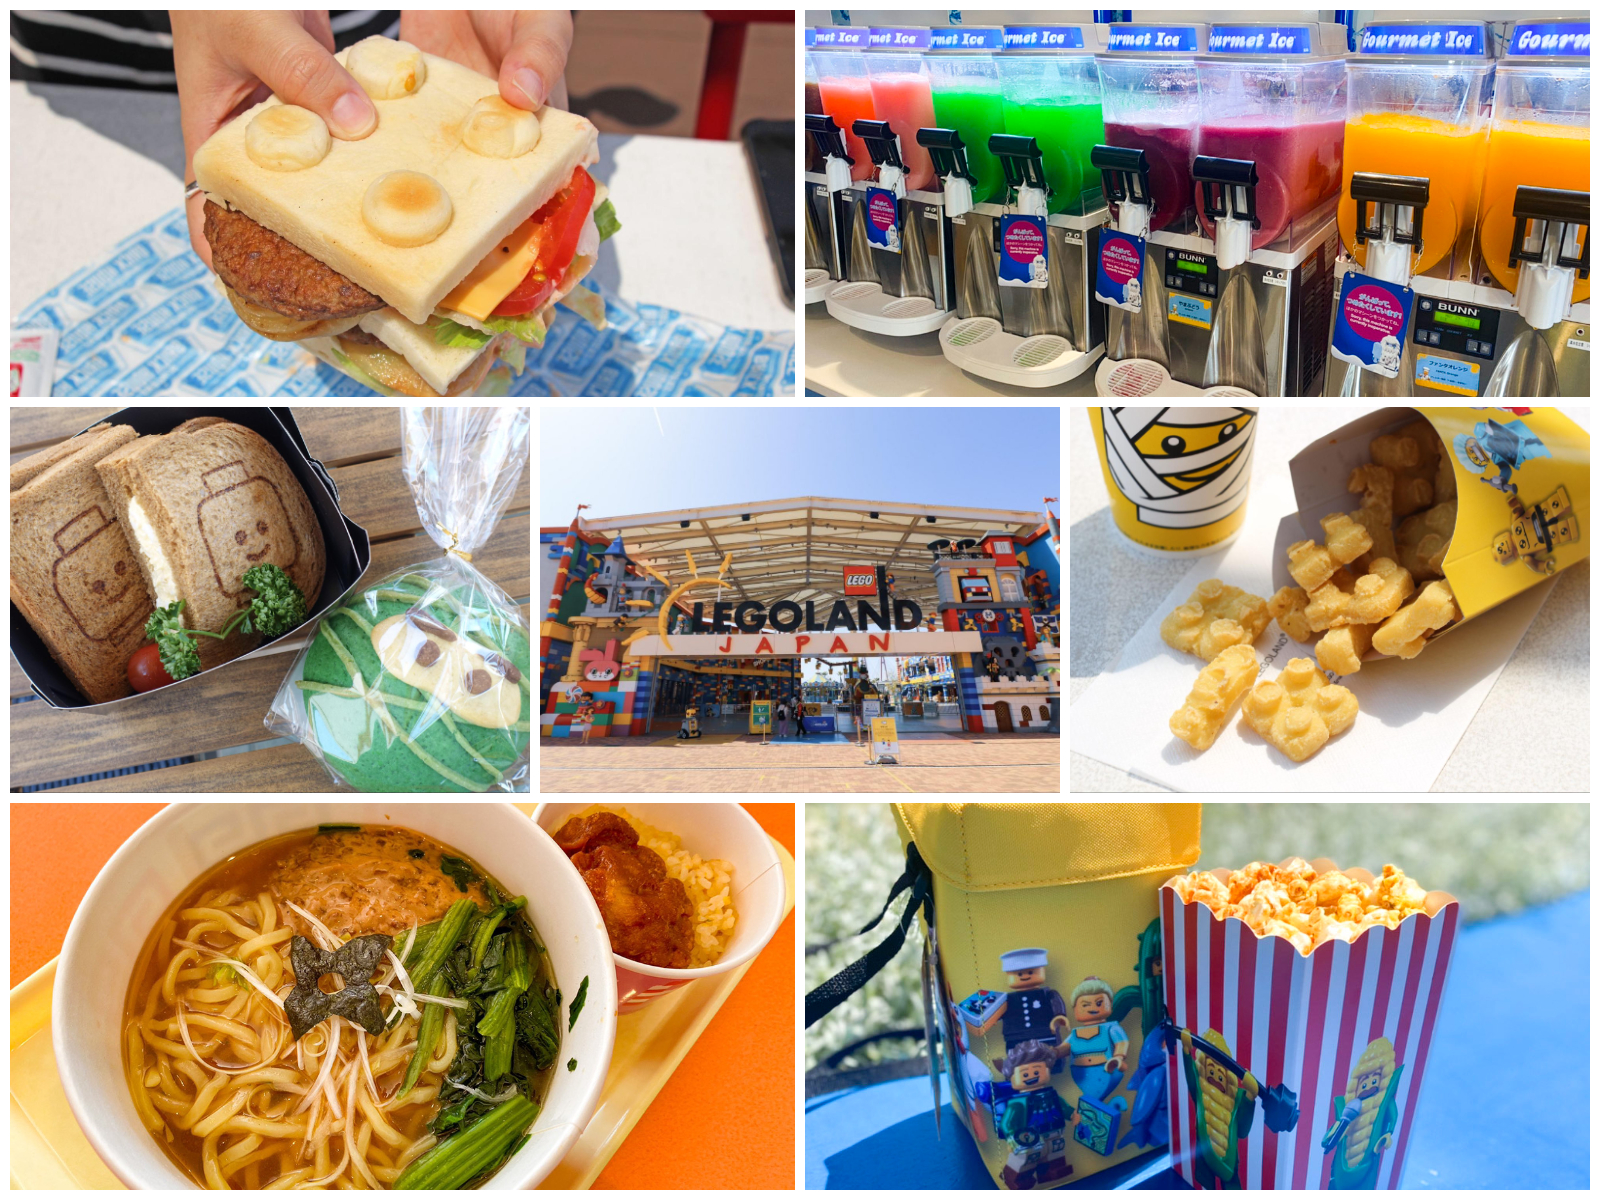 12 recommended gourmet foods to eat at LEGOLAND! [Nagoya]